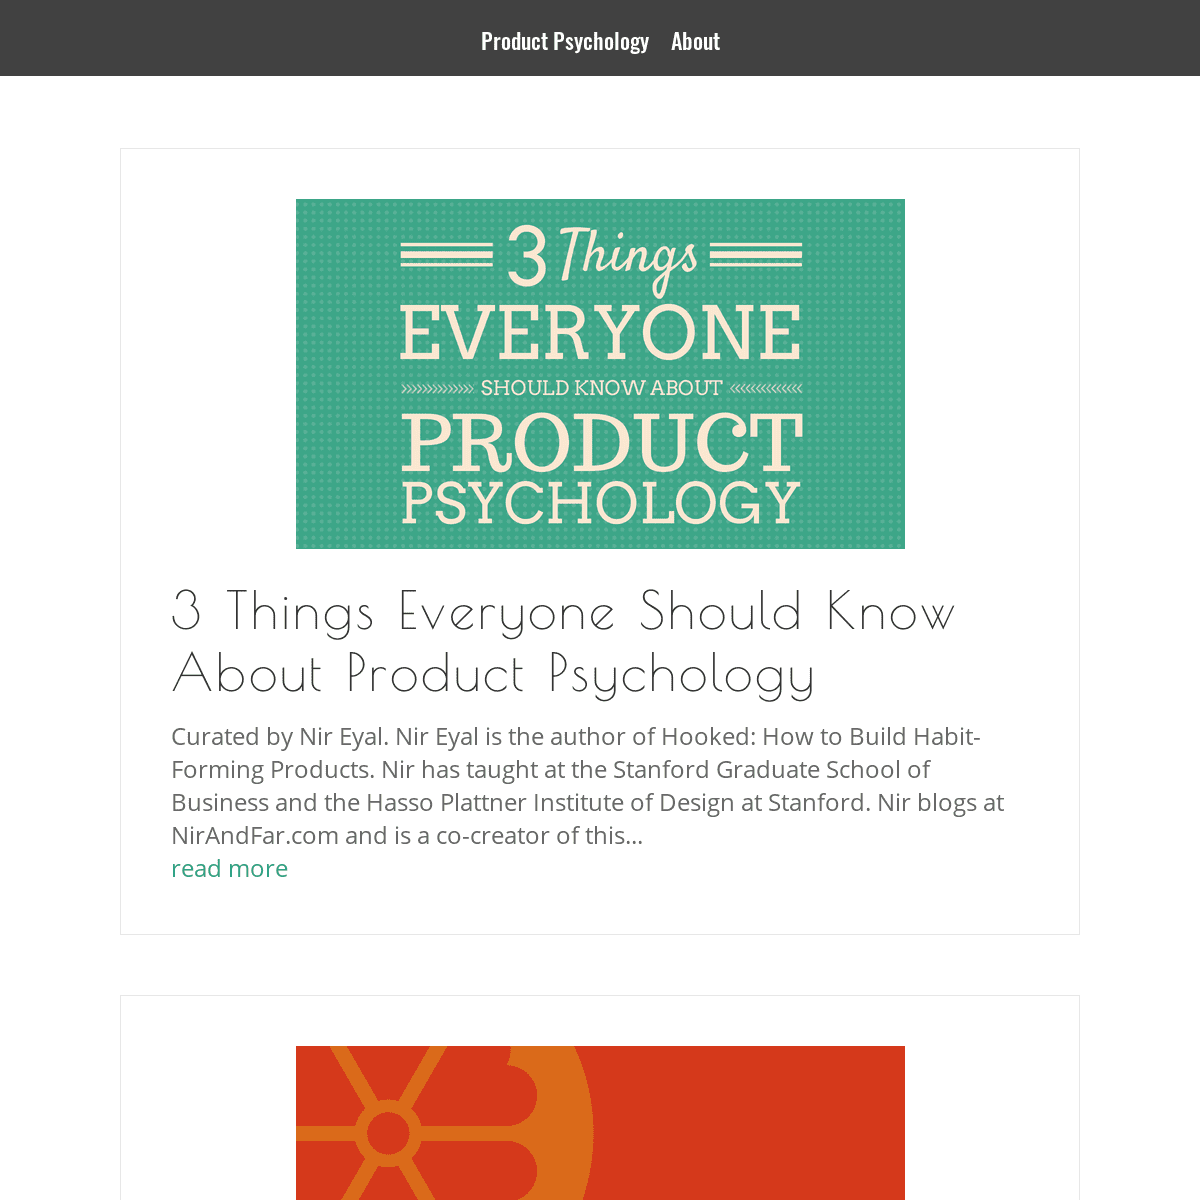 A complete backup of https://productpsychology.com